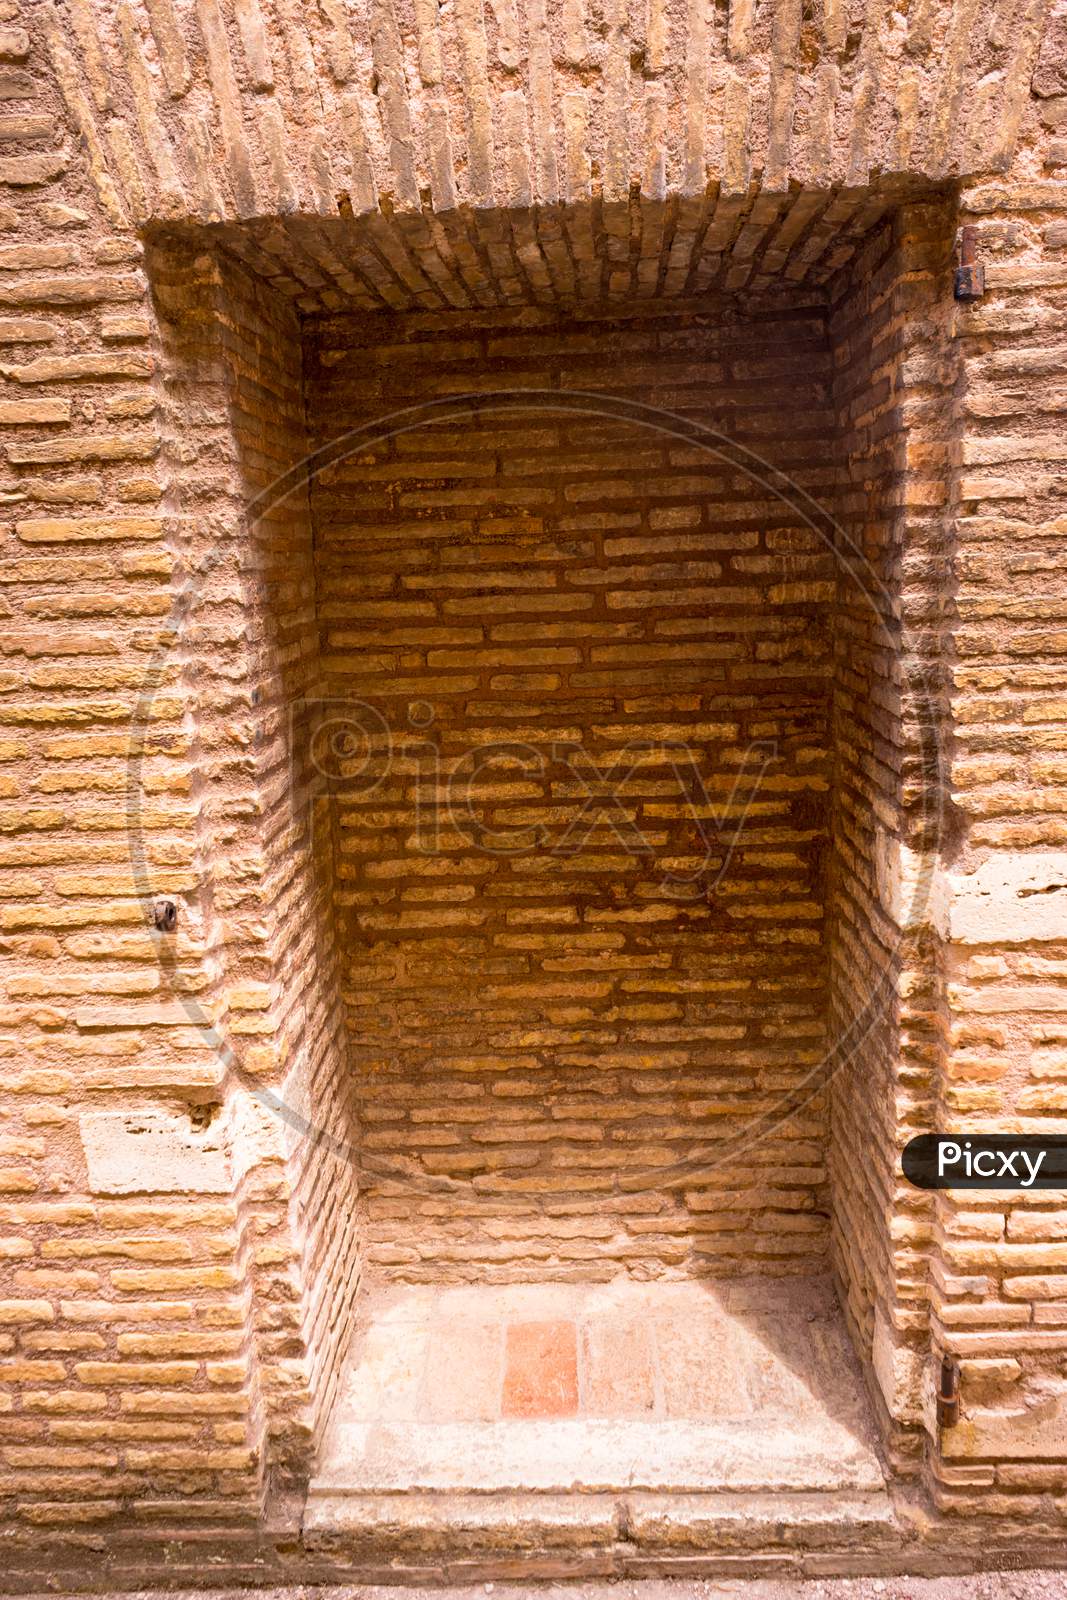 Italy, Rome, Castel Sant Angelo, Mausoleum Of Hadrian, A Close Up Of A Brick Building